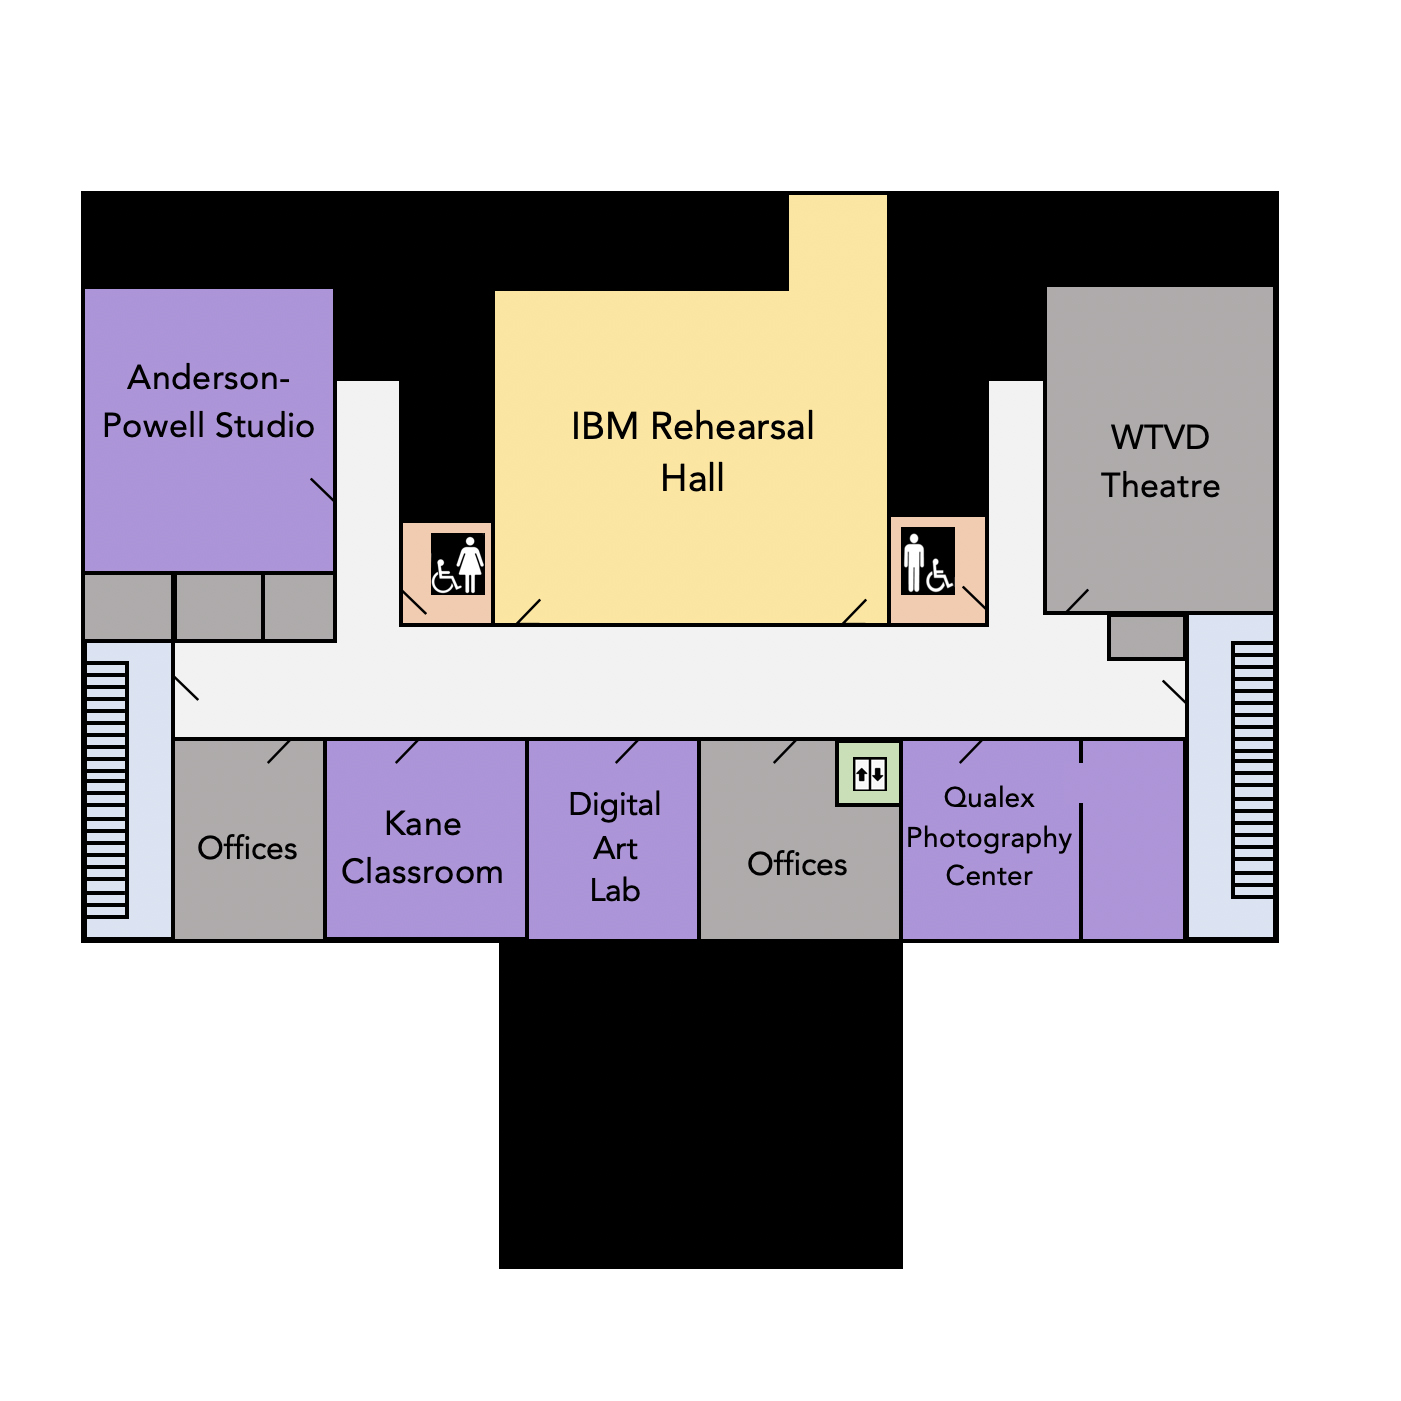 Floor plan of the lower level of the DAC building